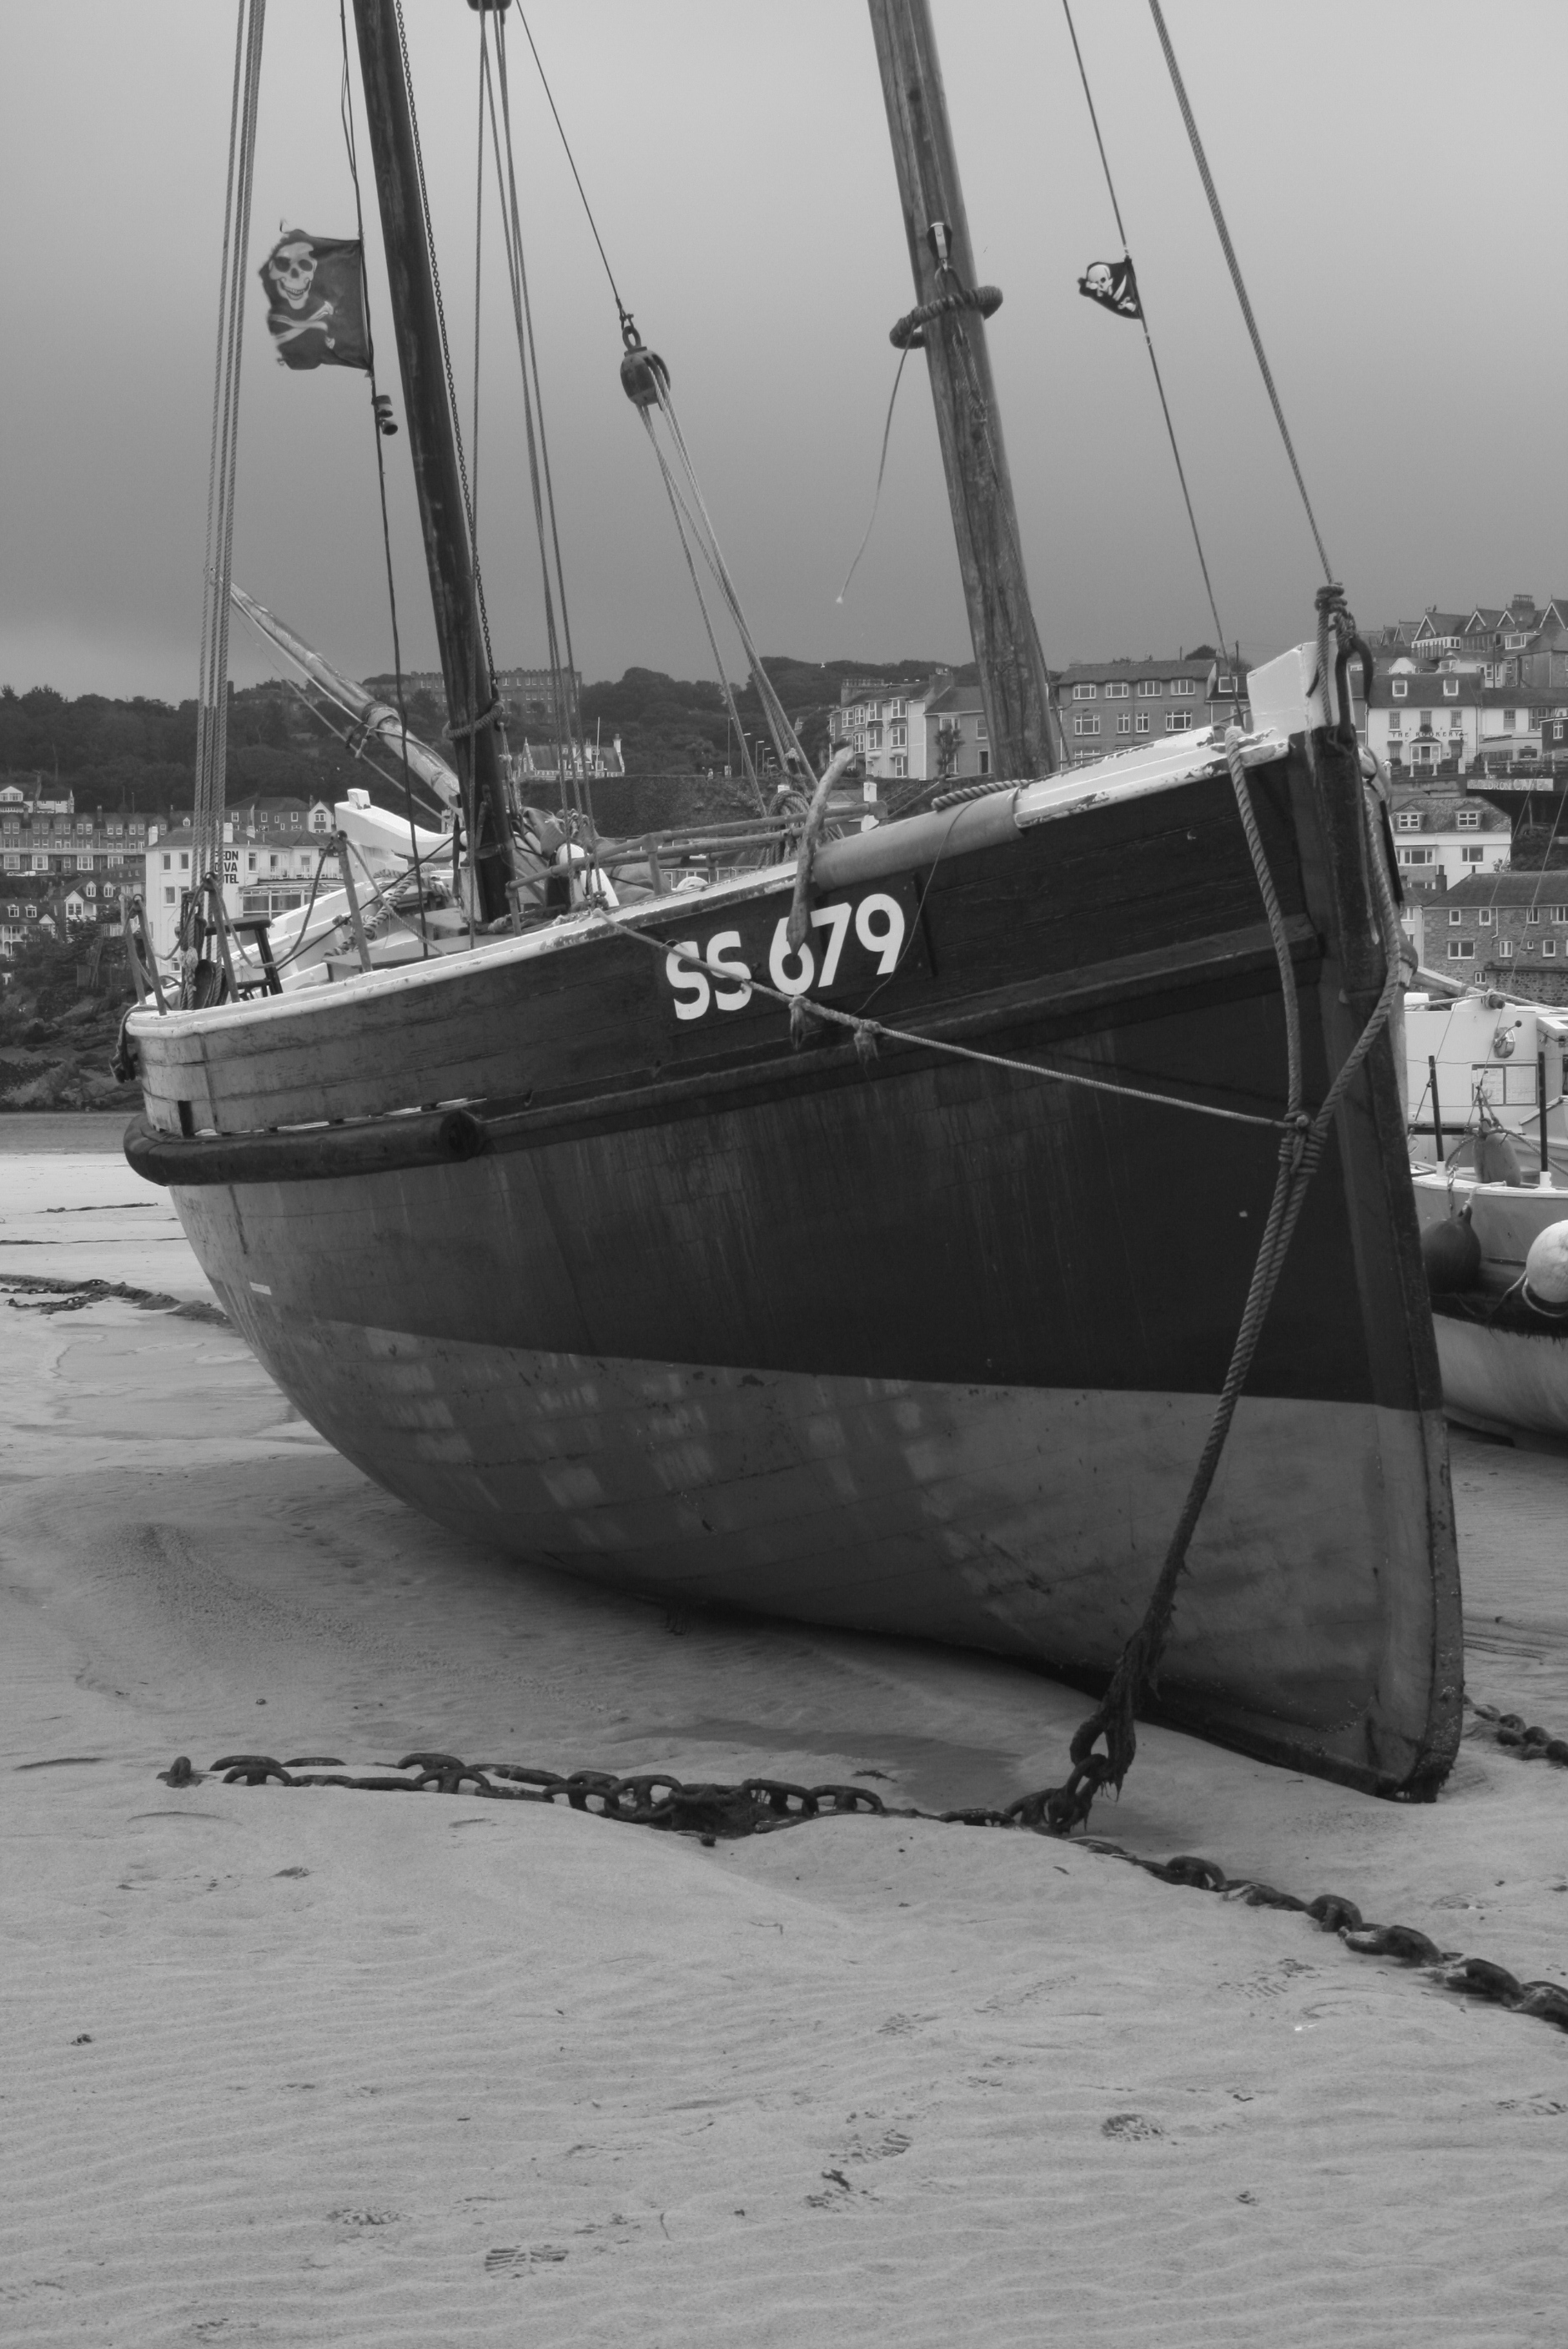 SS679, an old fishing boat at low tide in St. Ives harbour, Cornwall ...